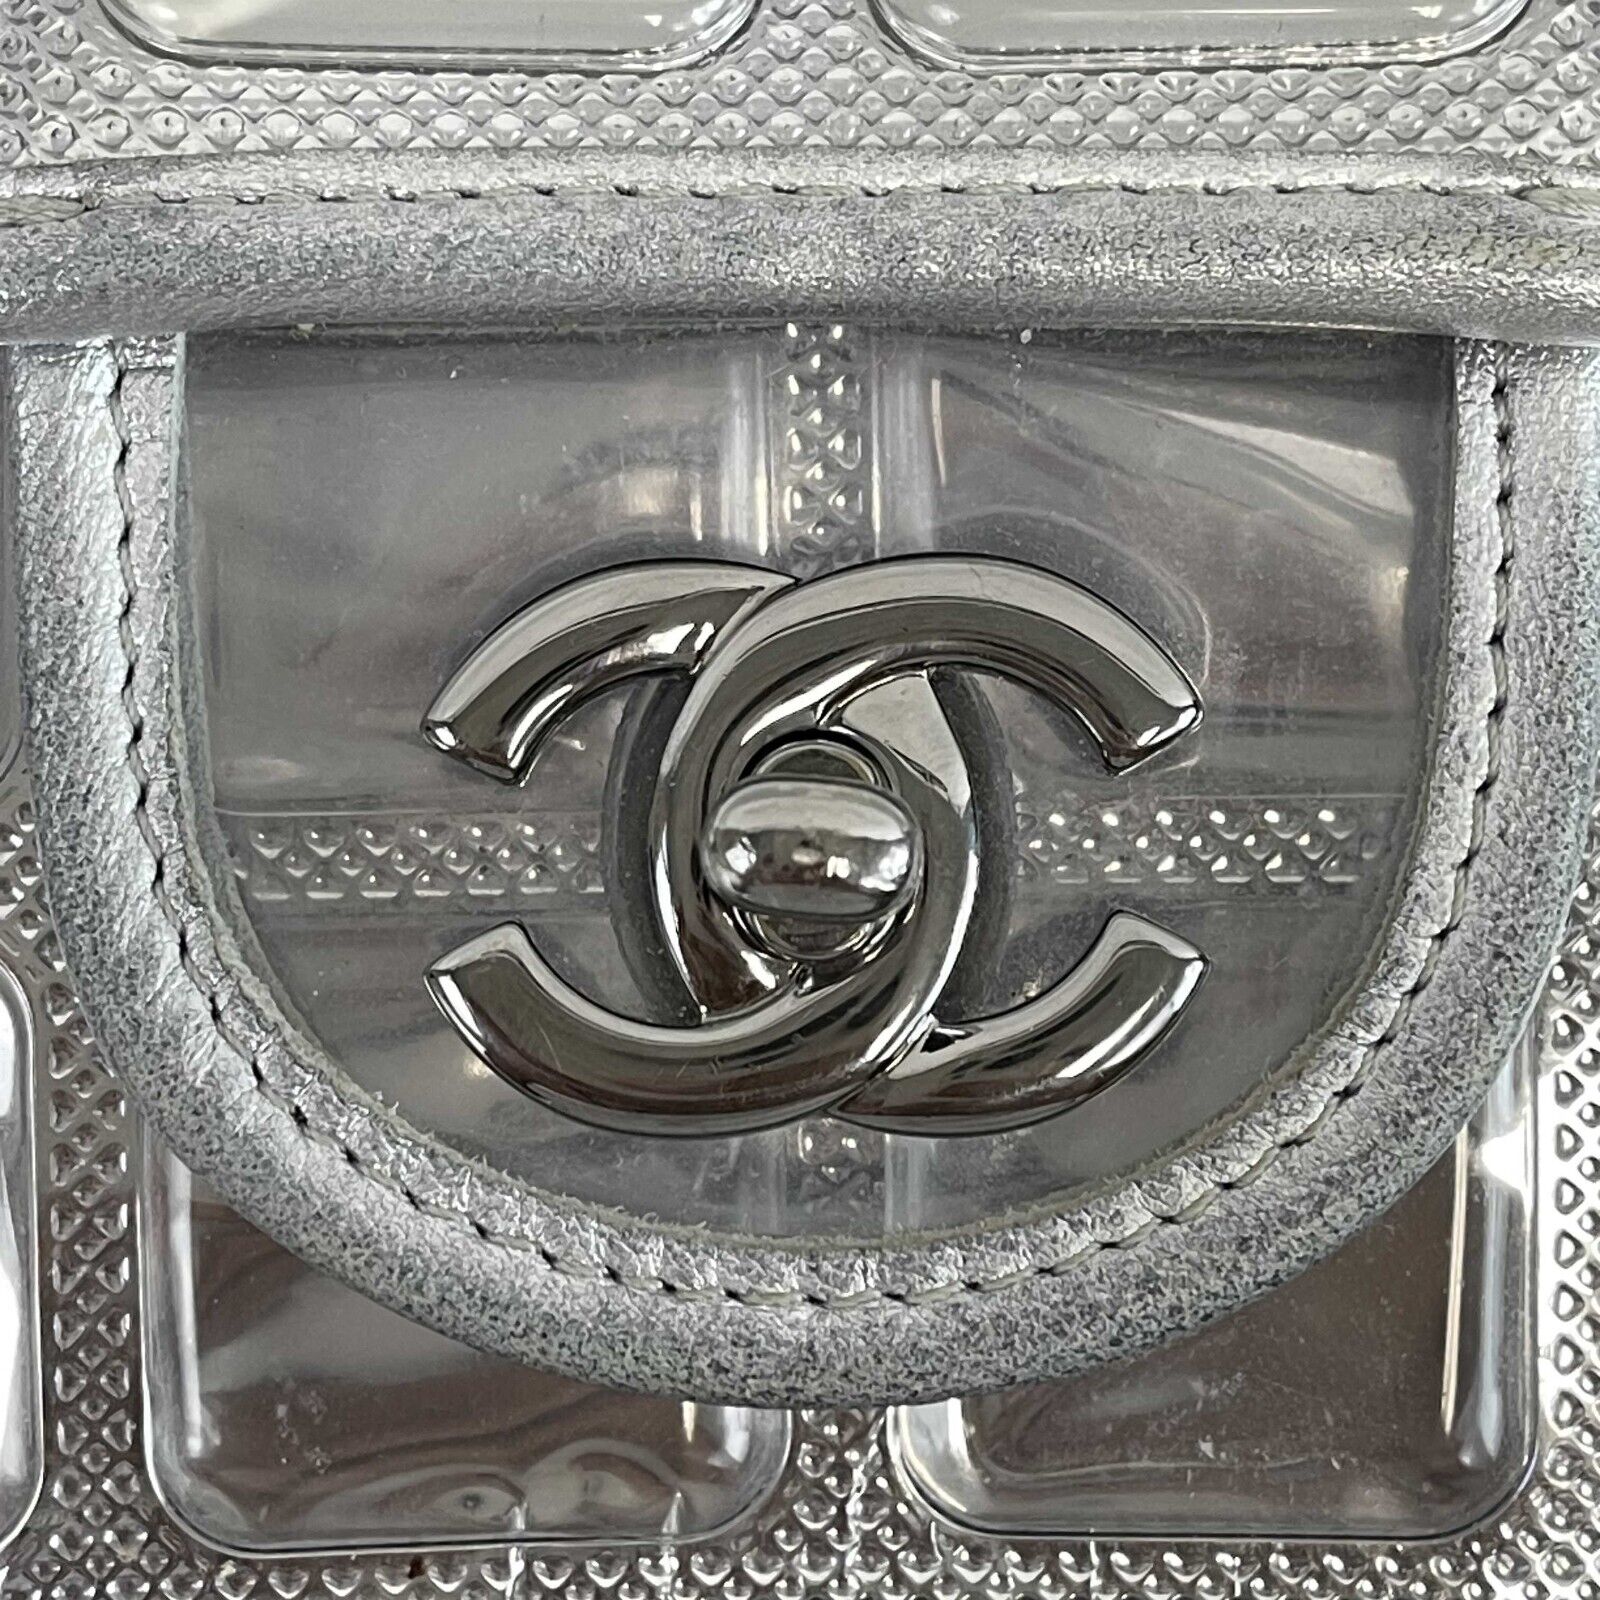 clear chanel purses for women